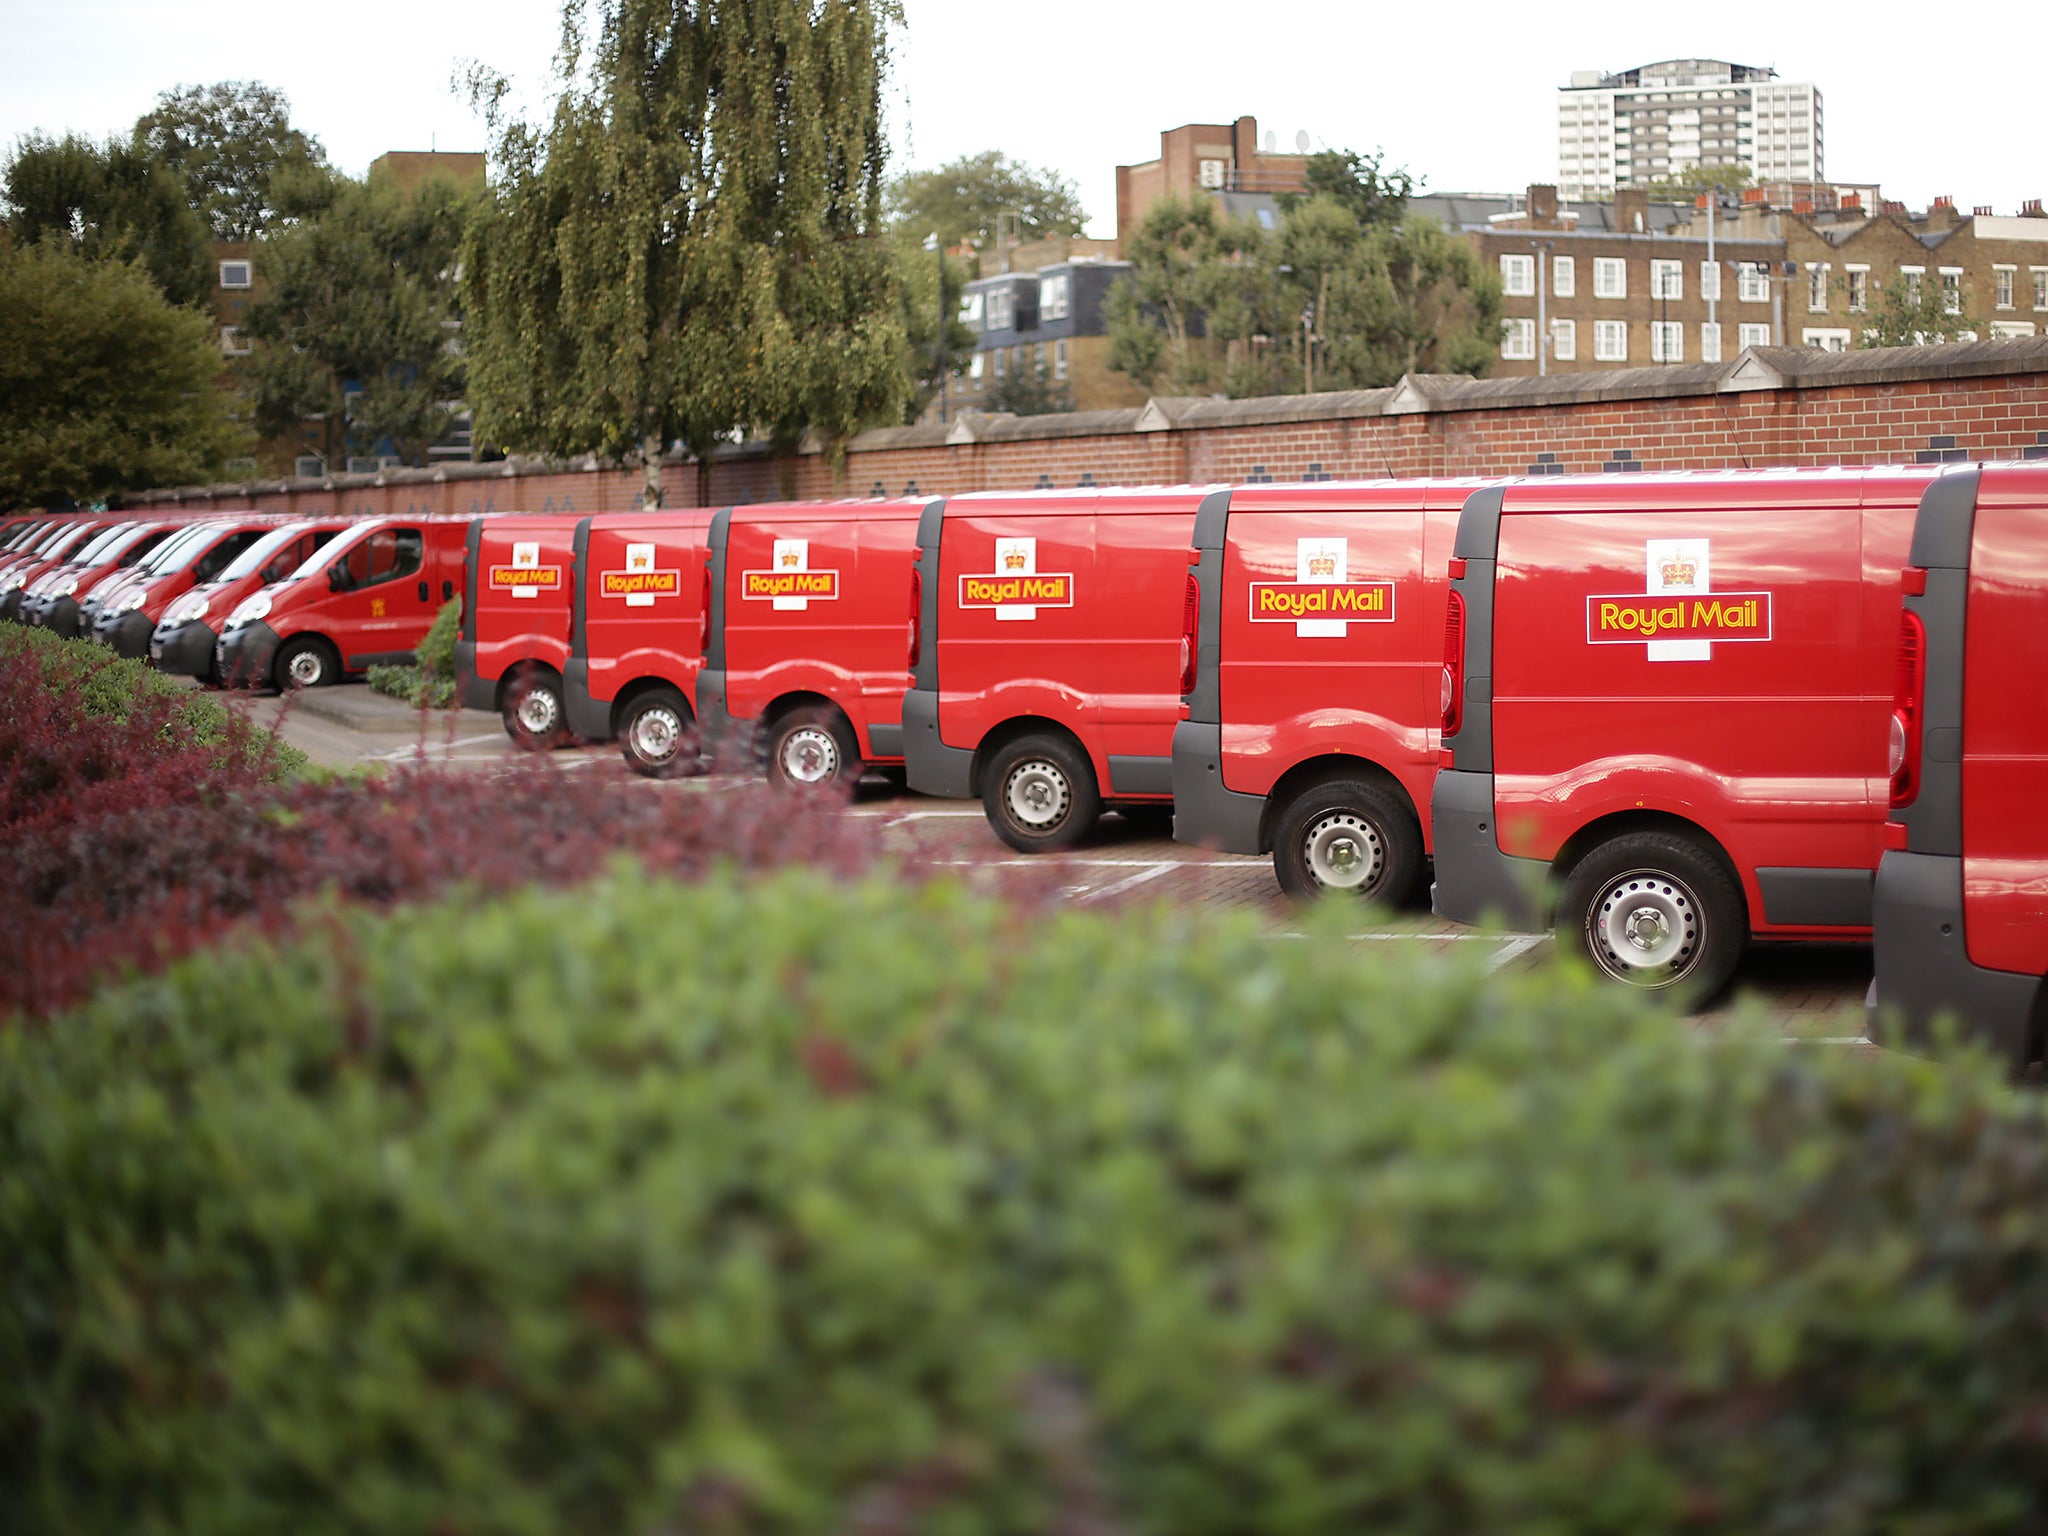 Royal Mail has in recent months been embroiled in a pension dispute